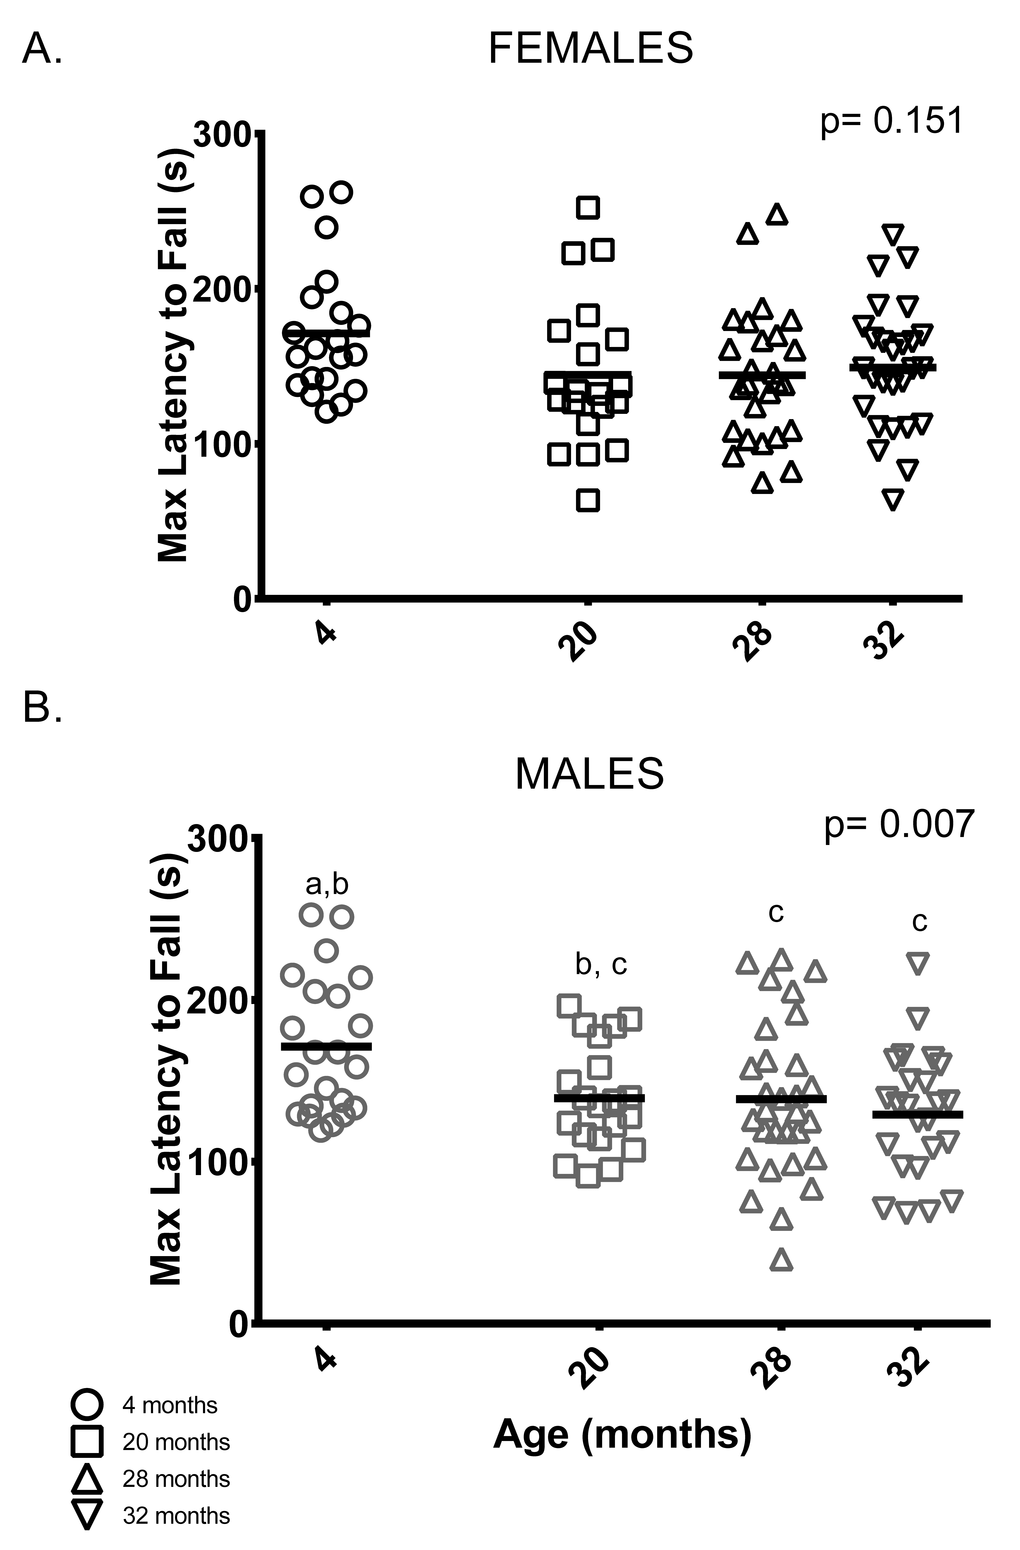 Younger males, but not females, performed better than older mice on the rotarod test. (A) Rotarod performance varied among female mice of all age groups. (B) 4-month -old males stayed on the rotarod longer than 28 and 32-month -old males (p = 0.042 and p = 0.006, respectively). Post-hoc tests subject to Bonferroni correction for multiple comparisons. Rotarod sample size: Females n = 20, 20, 26 and 27 for 4, 20, 28 and 32 months; Males n = 22, 20, 30 and 24 for 4, 20, 28 and 32 months.